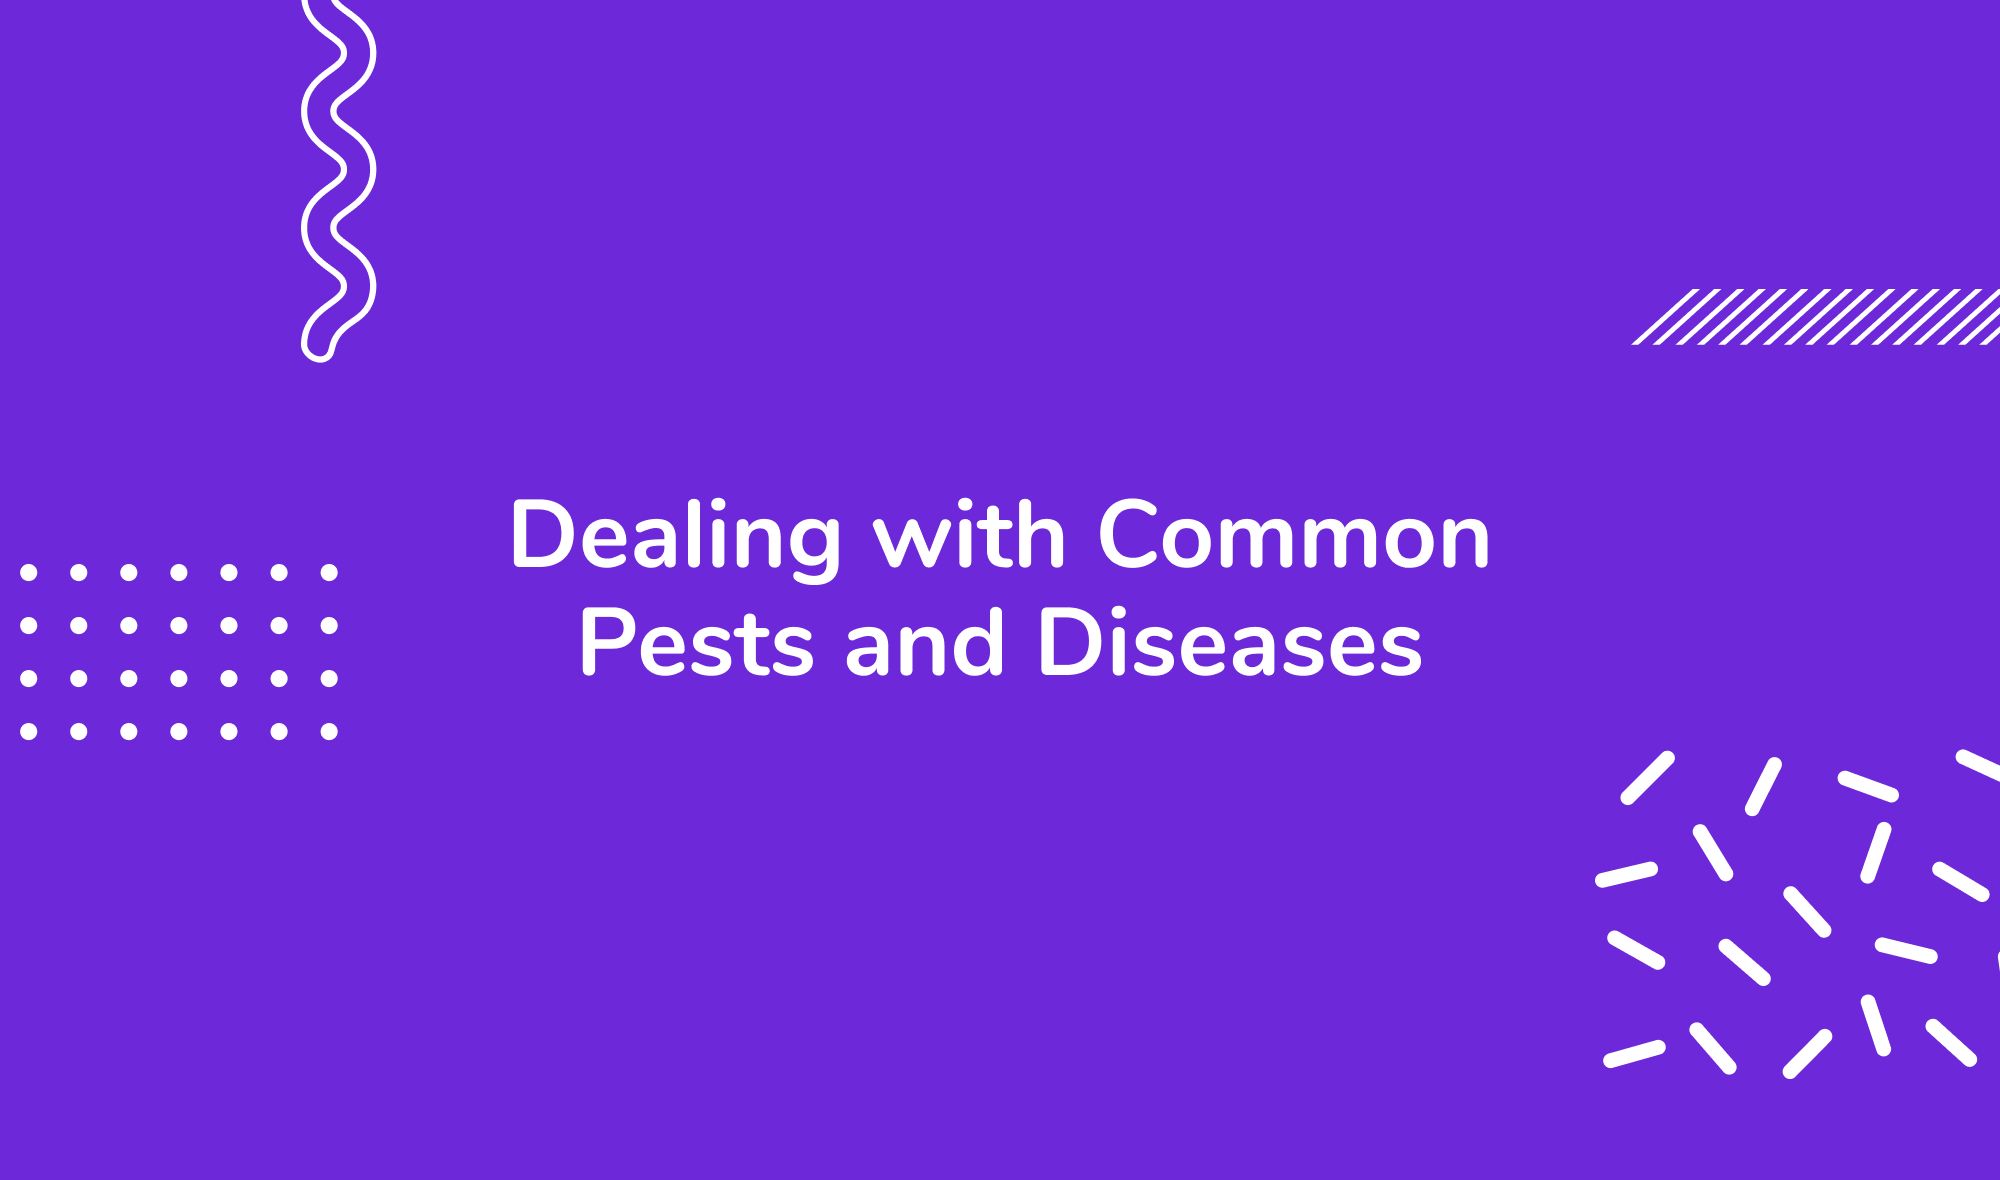 Dealing with Common Pests and Diseases